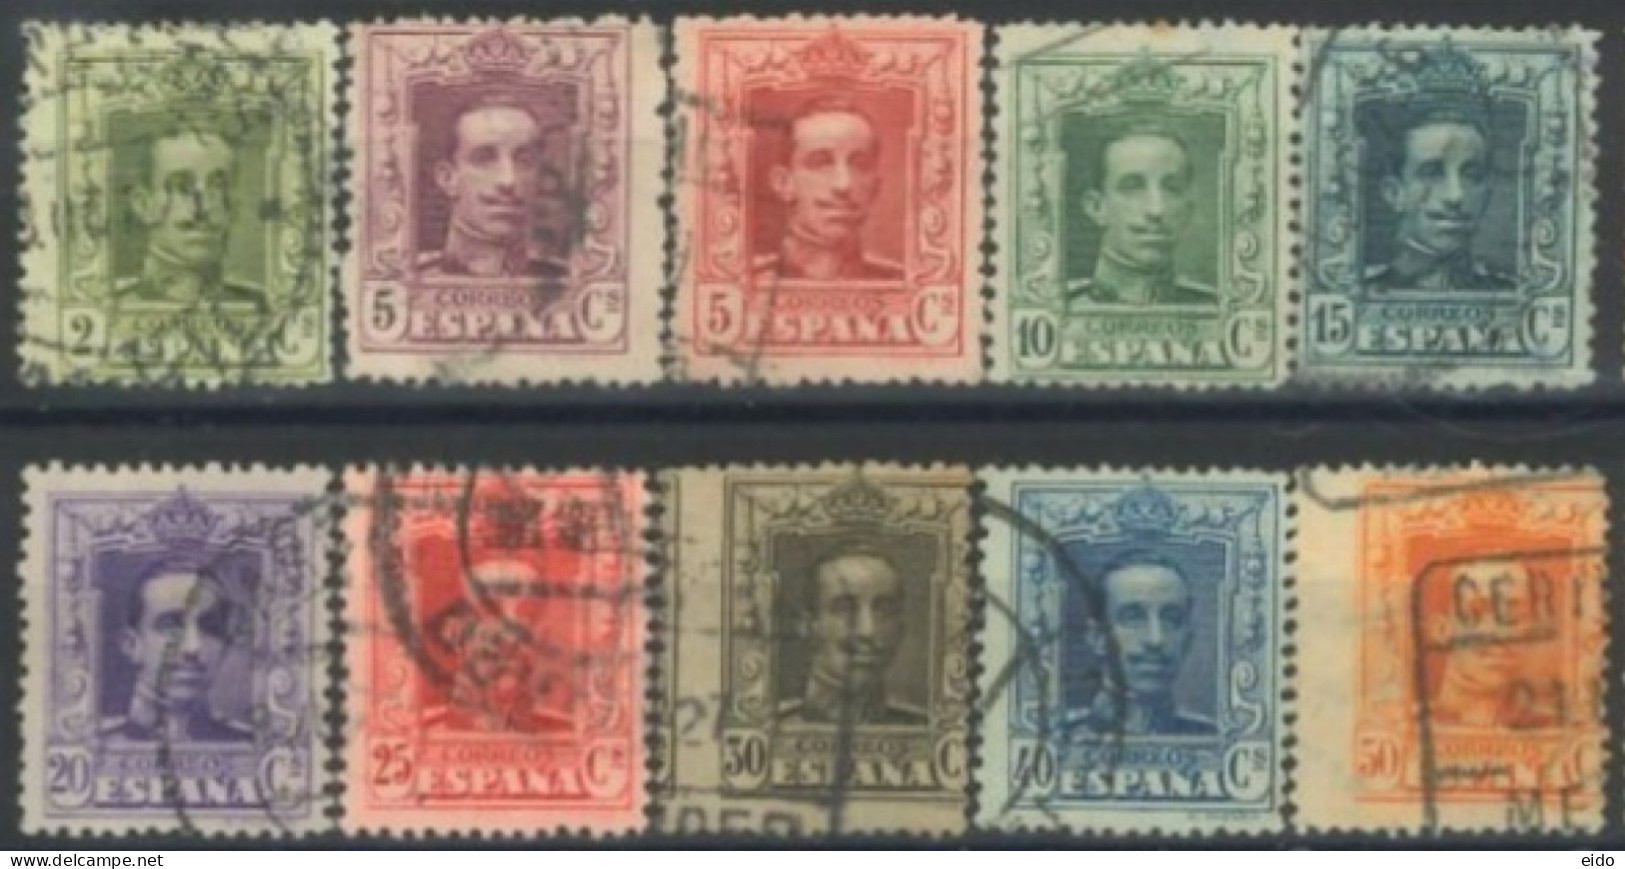 SPAIN, 1922/26, KING ALFONSO XIII STAMPS SET OF 10, # 331/33, &335/41, USED. - Used Stamps